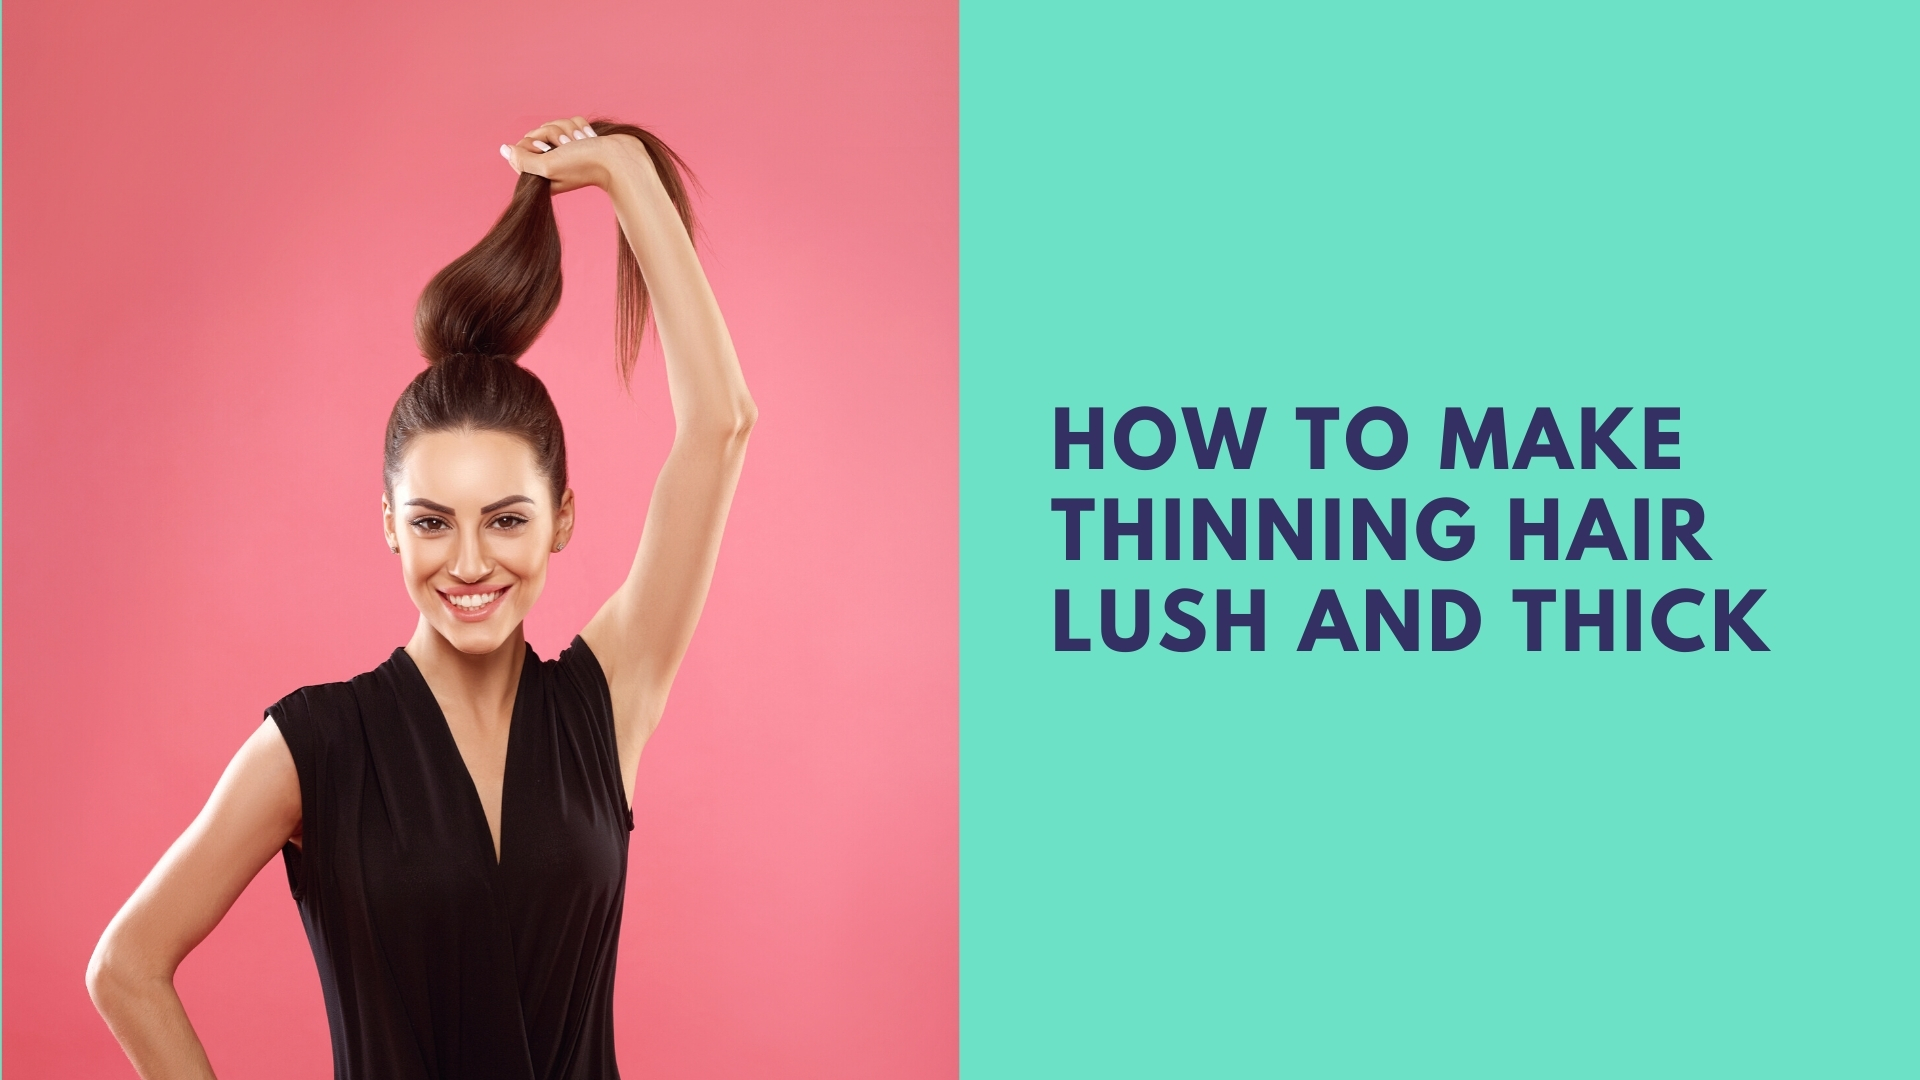 How To Make Thinning Hair Lush and Thick